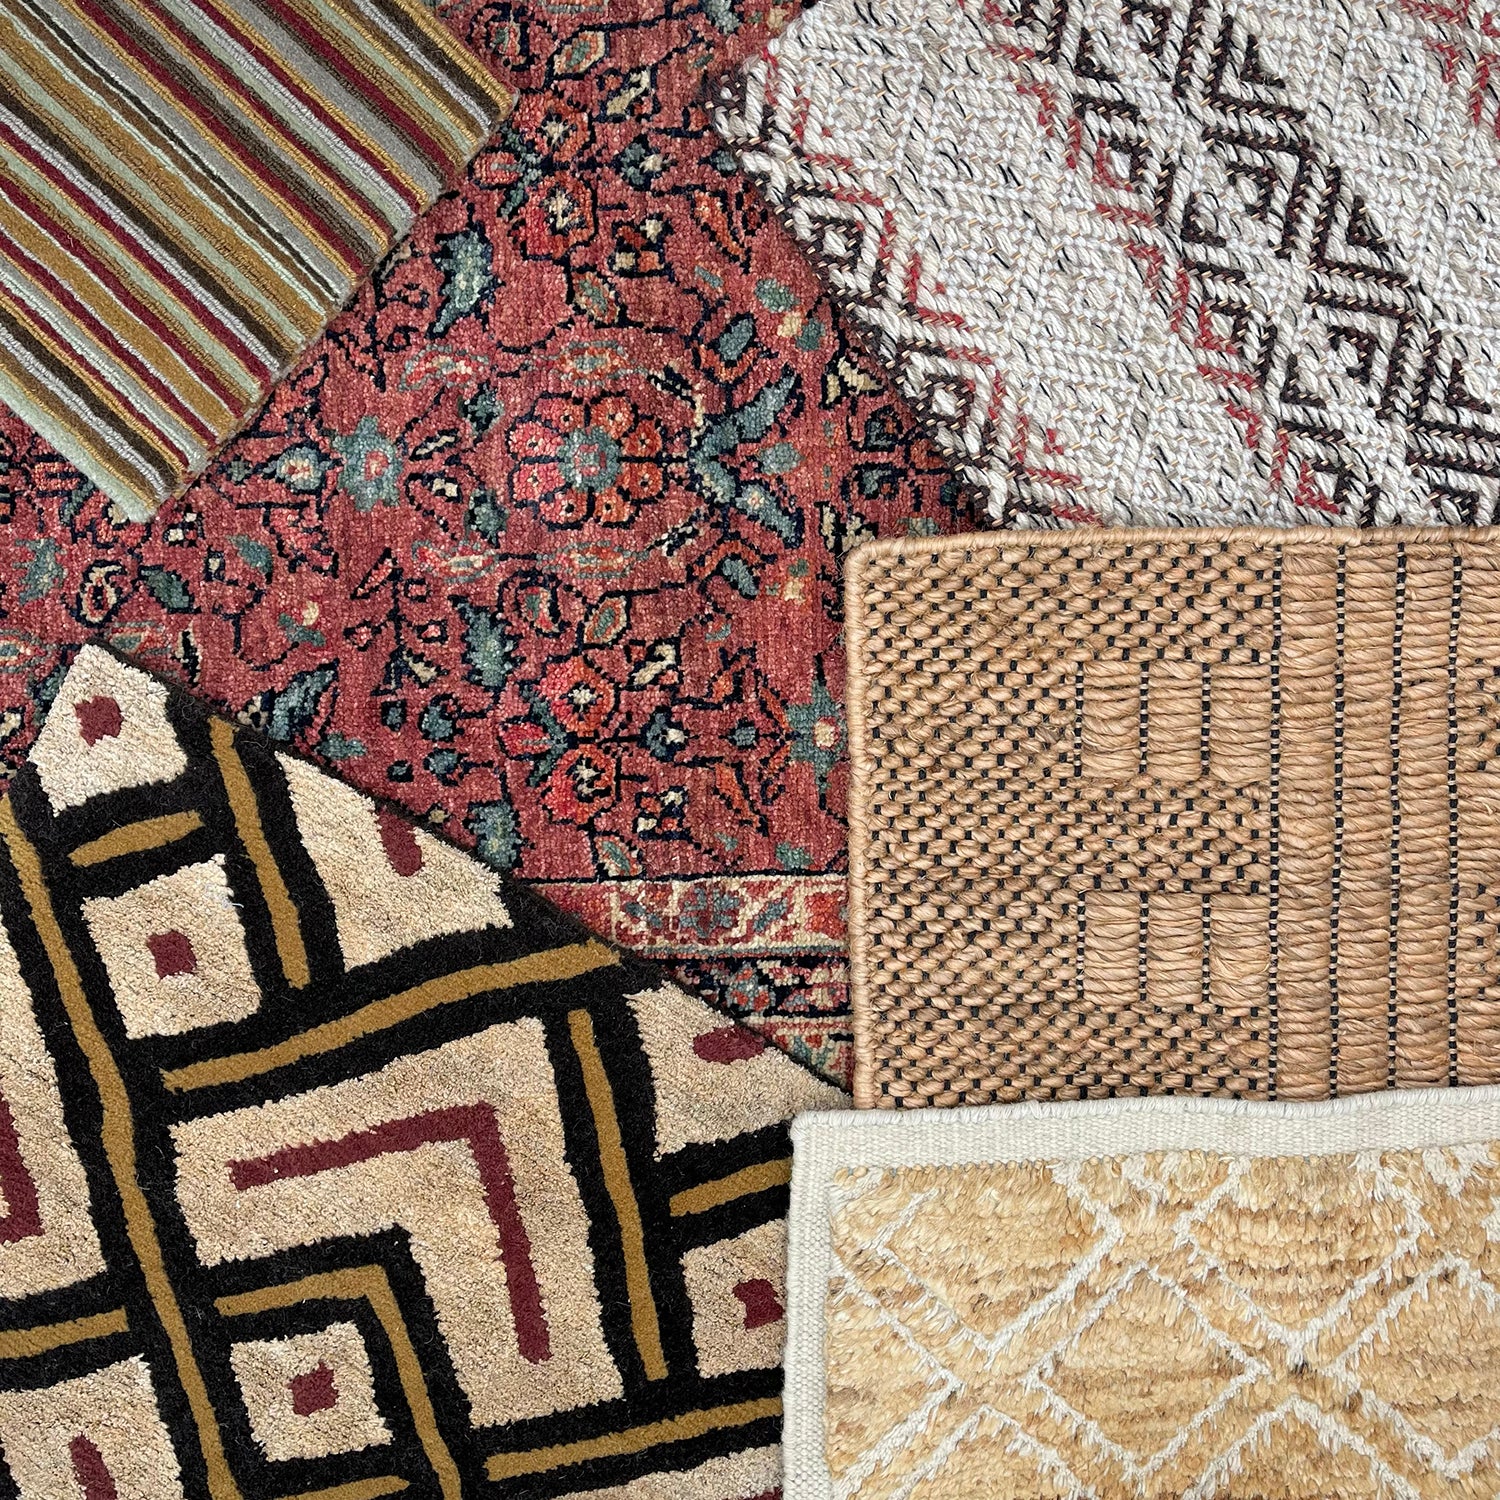 An array of custom rug samples, in various patterns in shades of tan, chrimson, cream and grey.